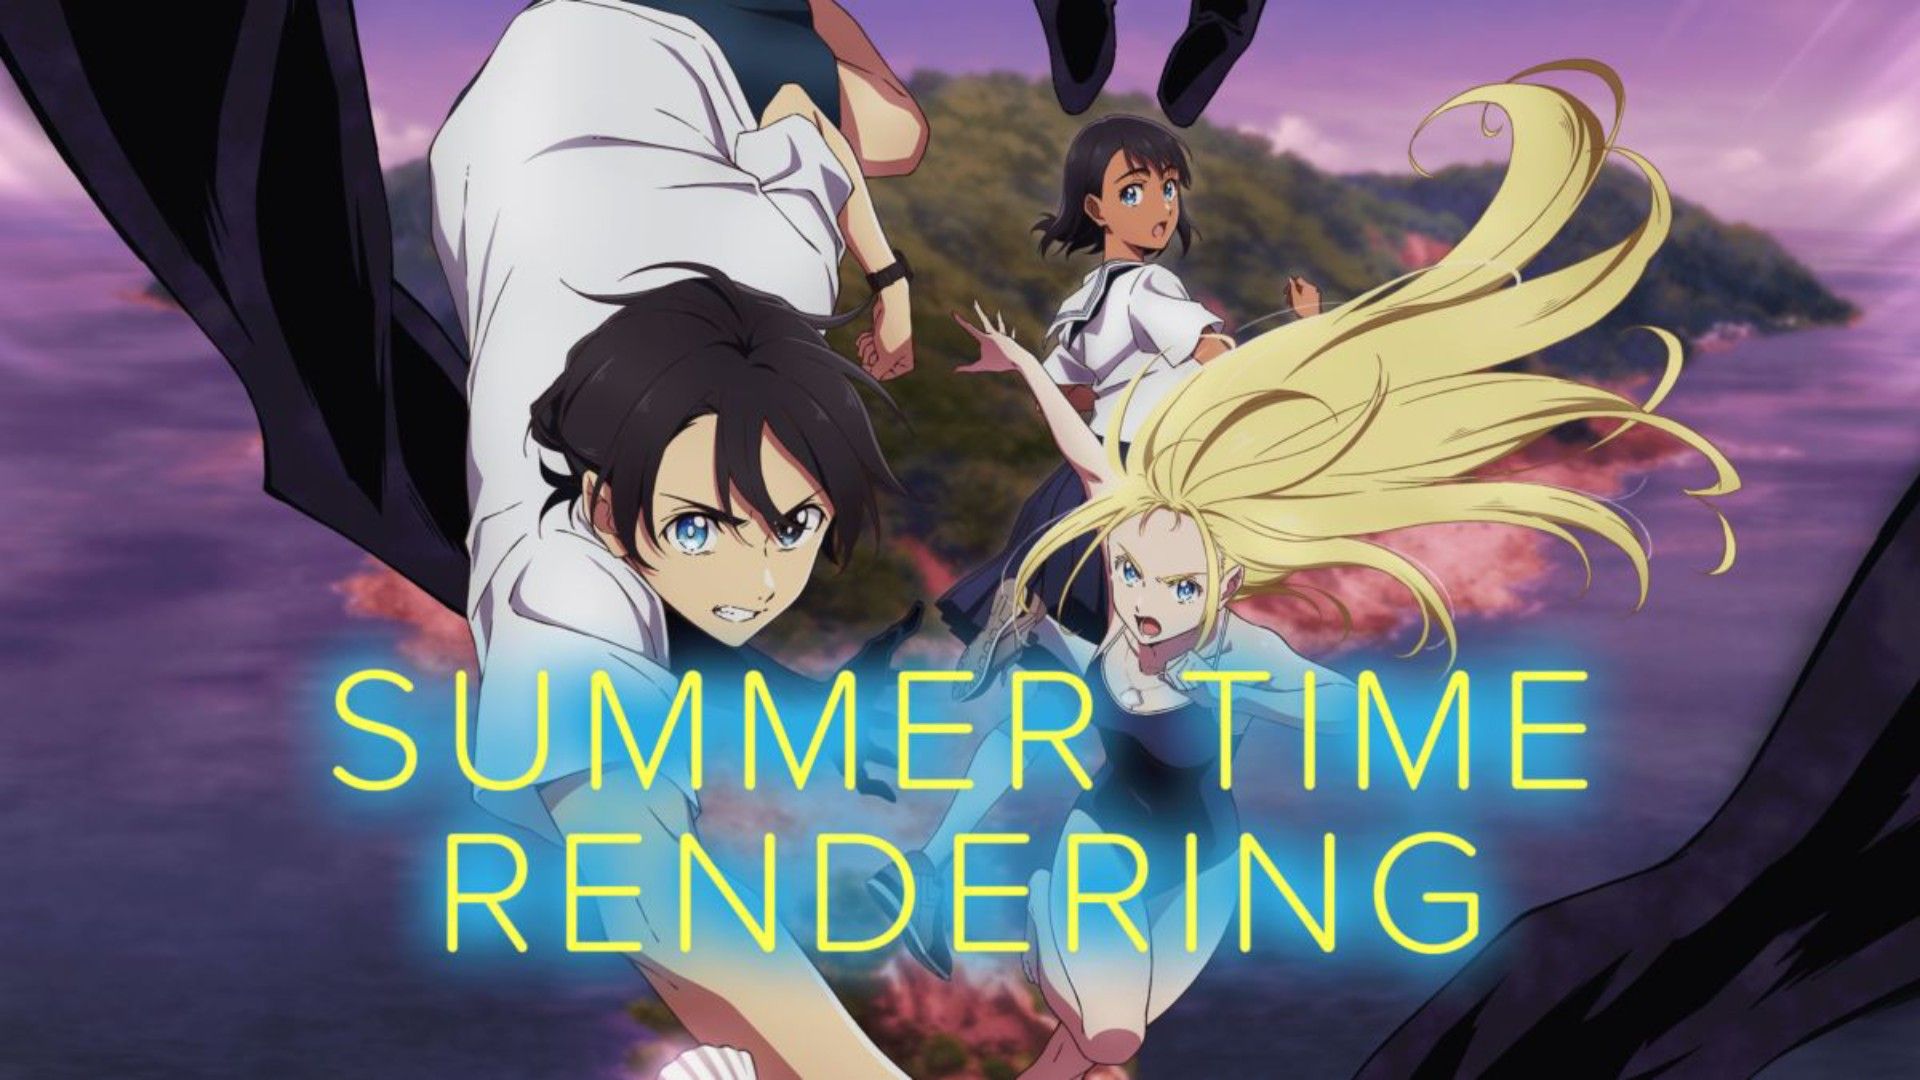 Summer Time Rendering 2nd Cour - Official Trailer - video Dailymotion